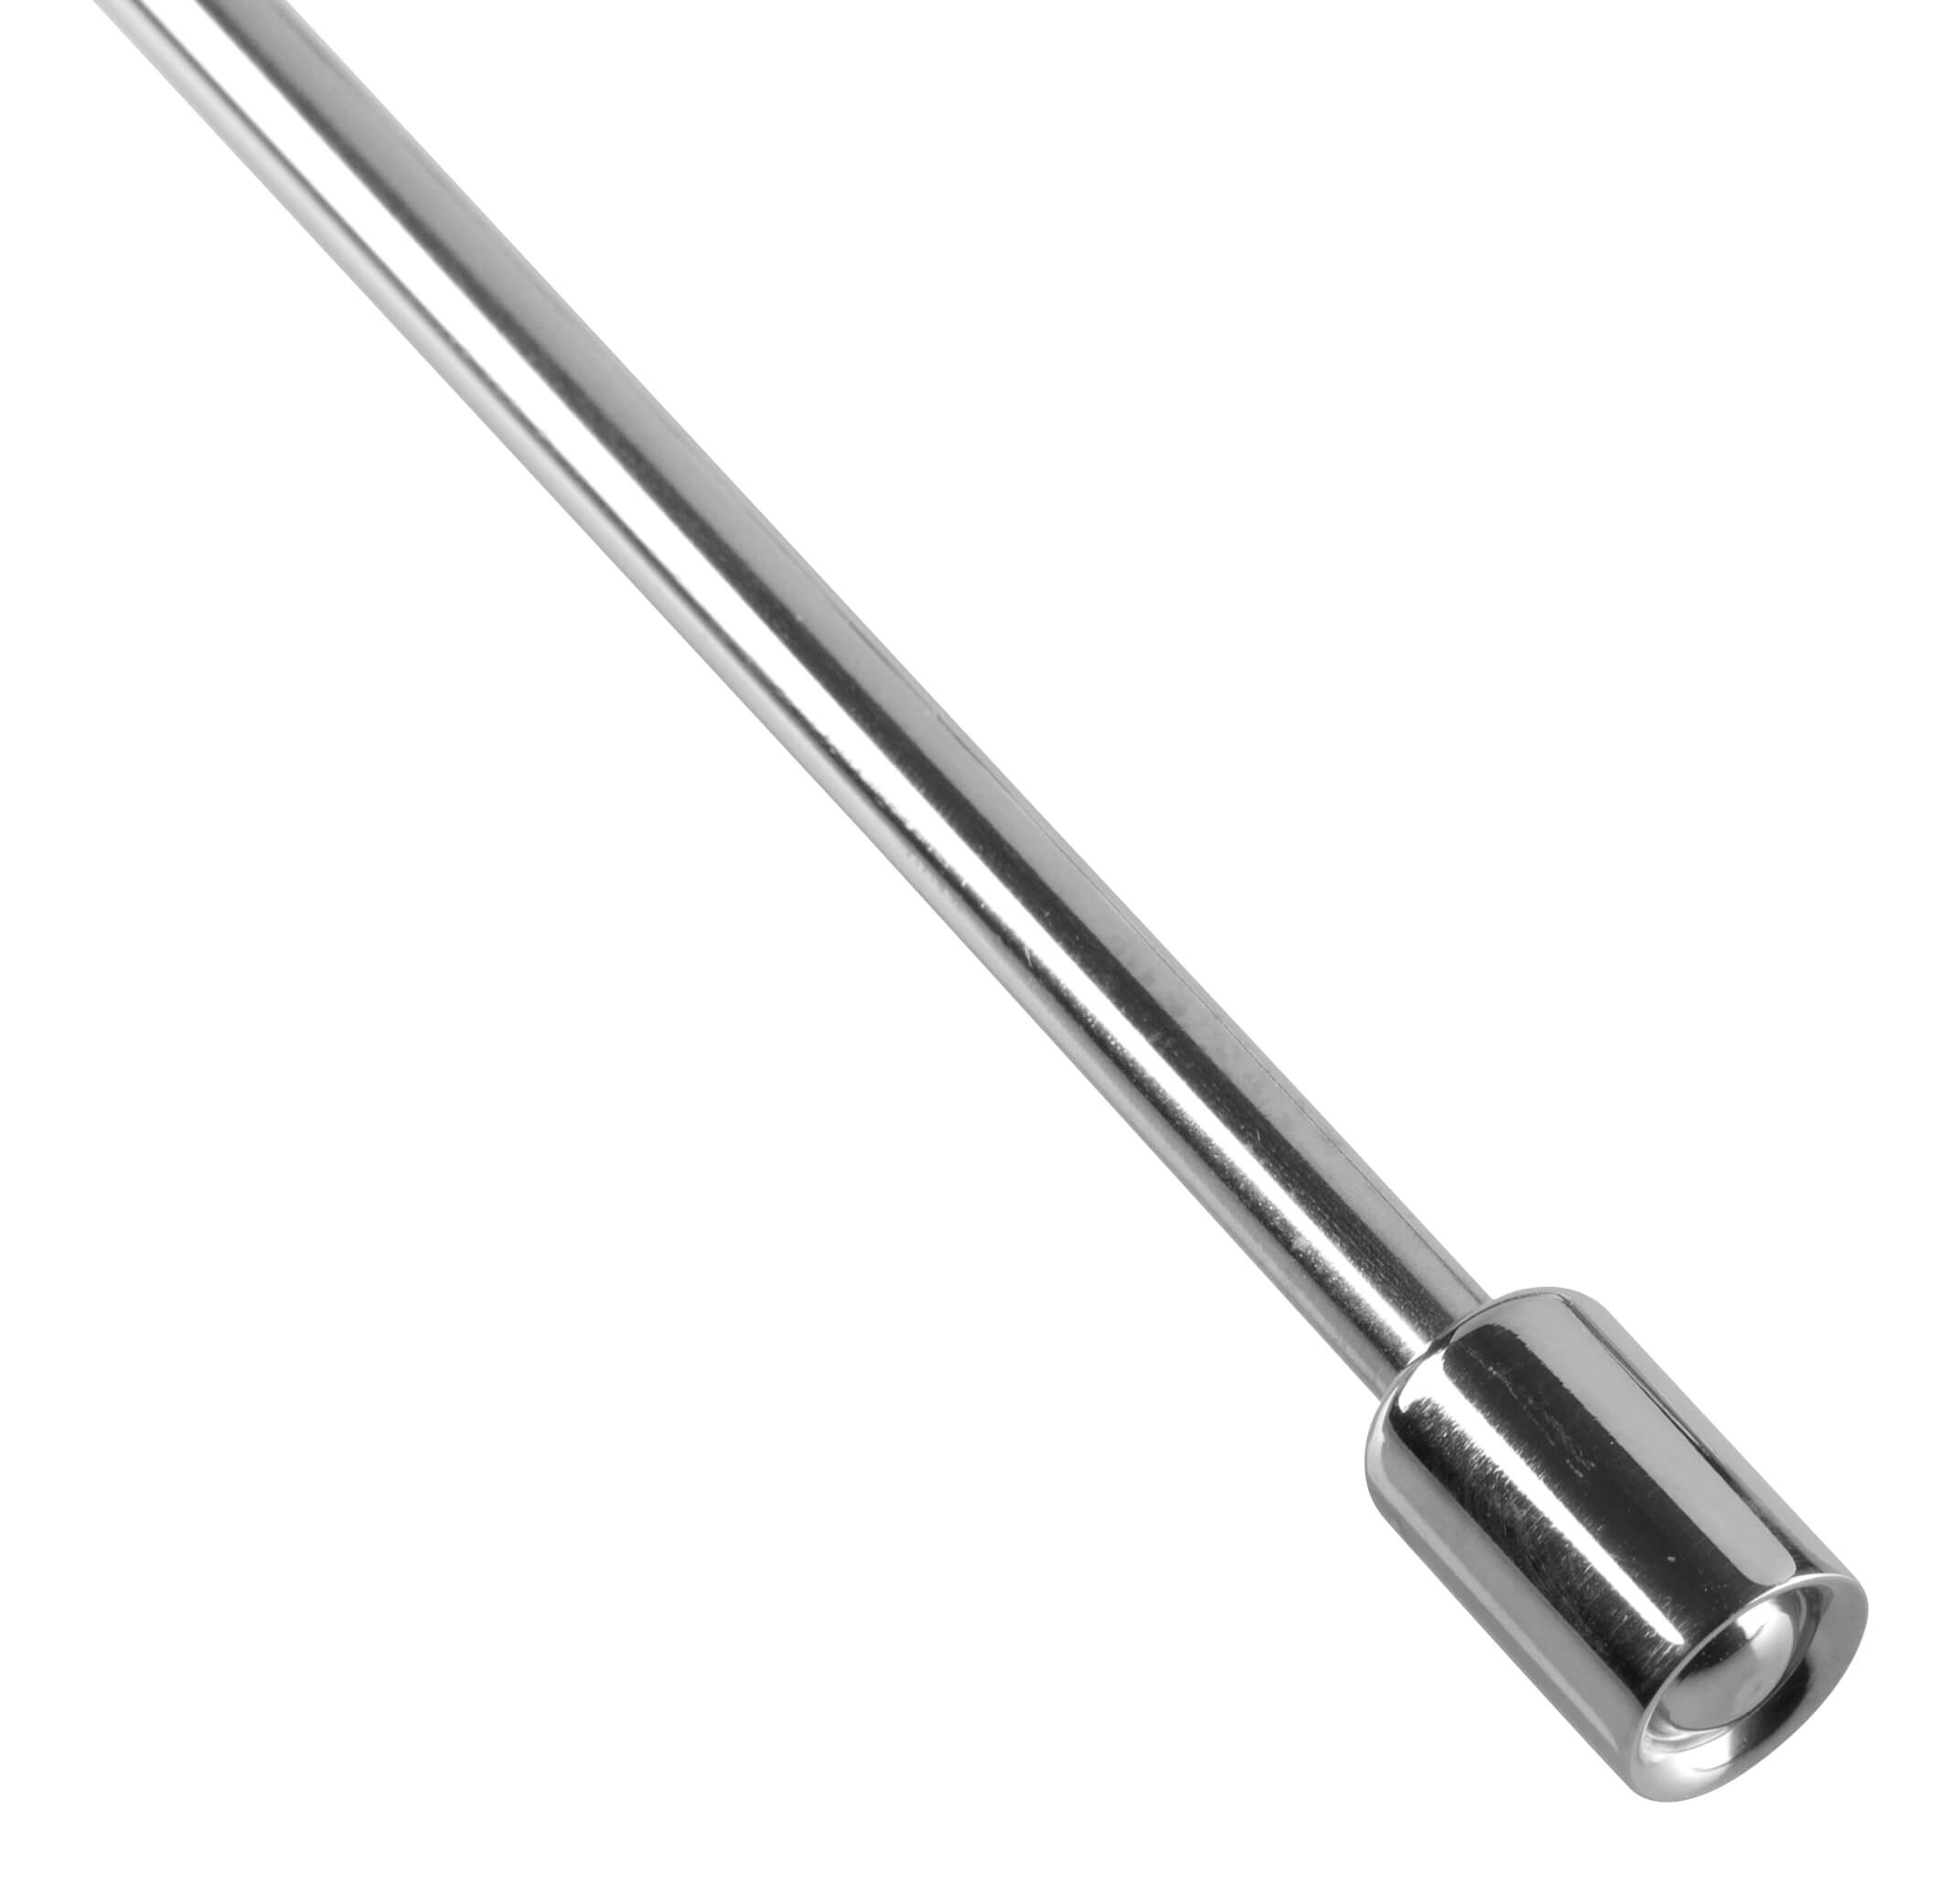 Bar spoon 5054, Alessi, stainless steel - 26cm